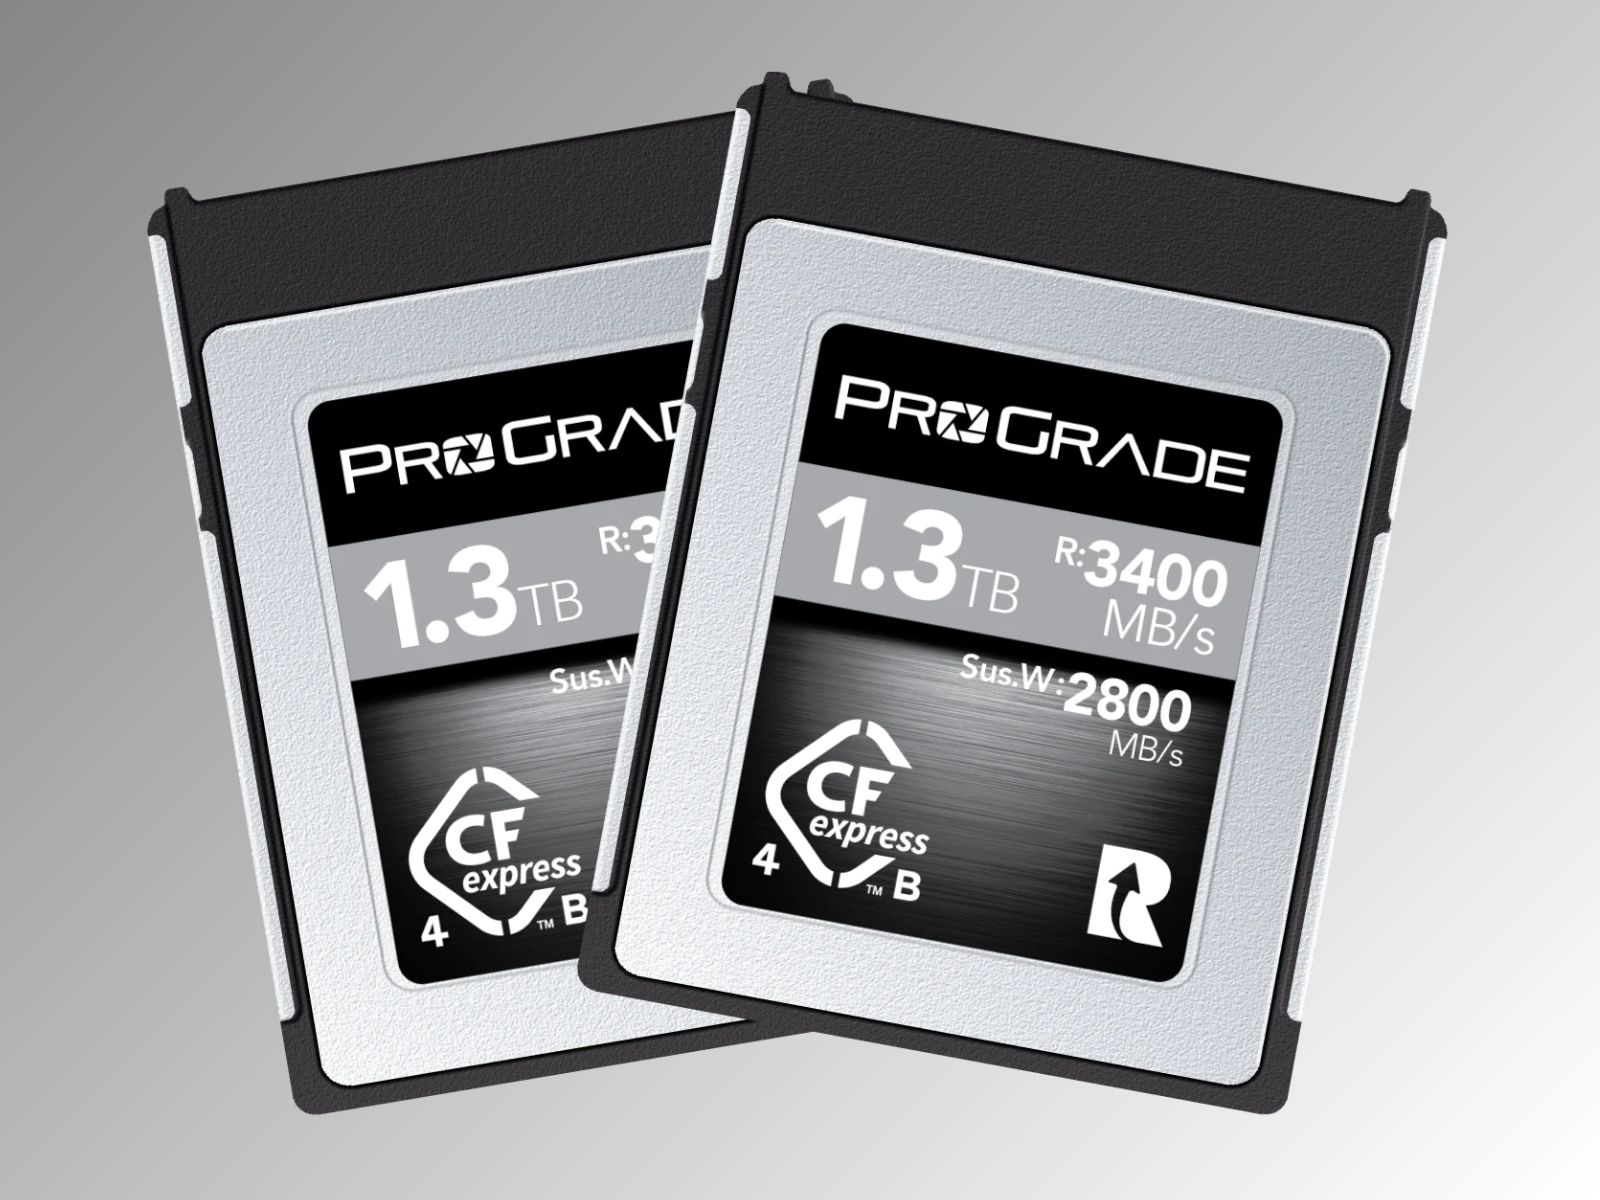 ProGrade unveils 1.3 TB memory card with blazing-fast 3400 MB/s